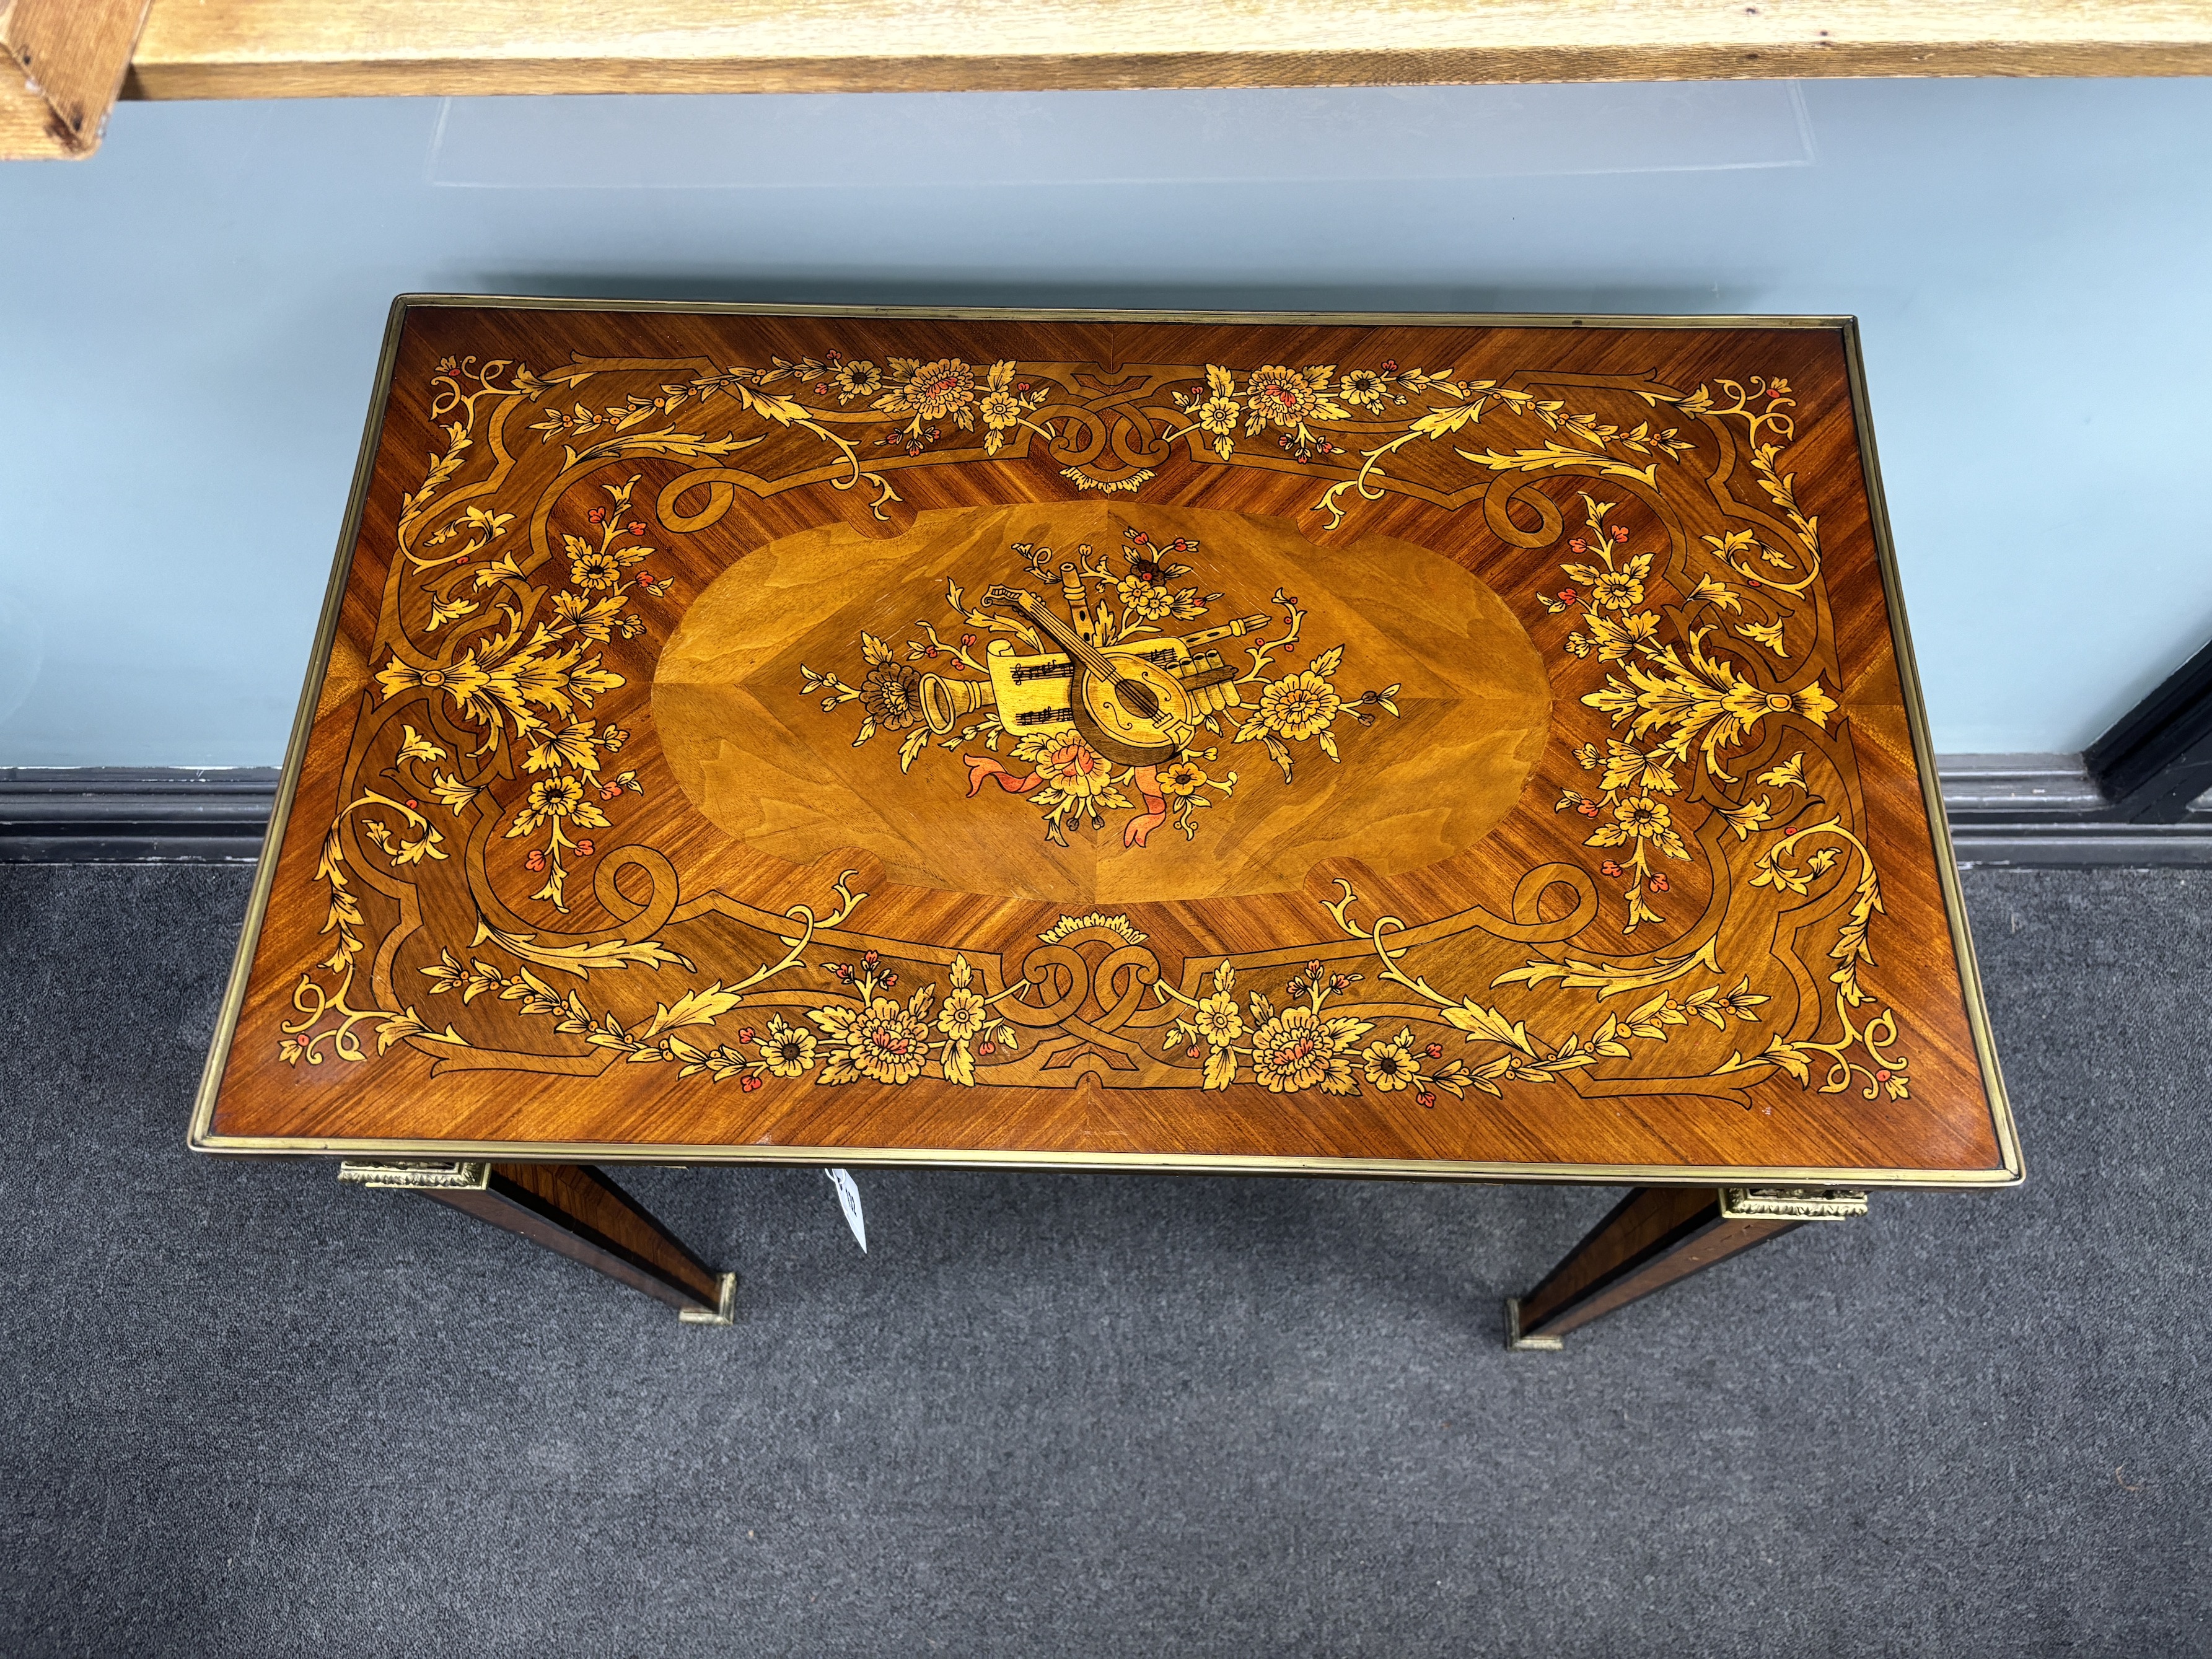 A Louis XVI style floral marquetry side table, the top inlaid with a musical trophy, width 80cm, depth 47cm, height 78cm